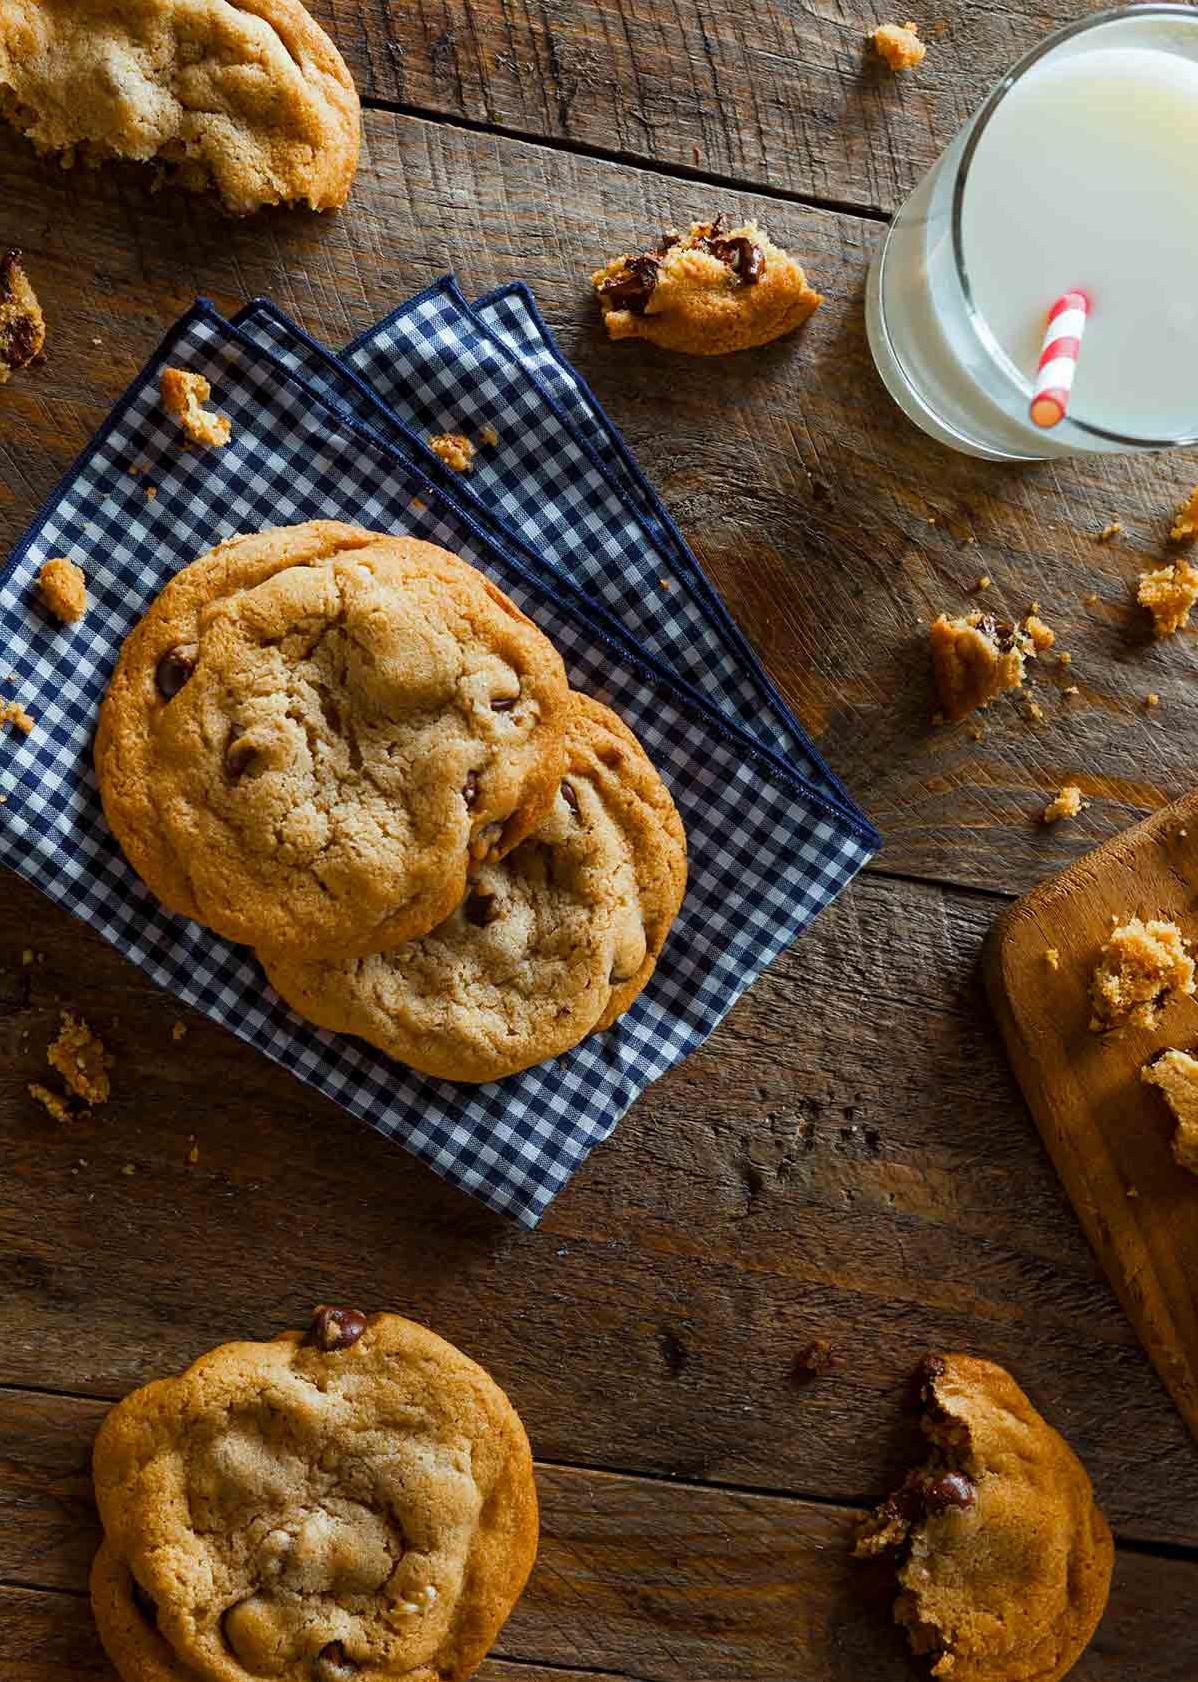  Treat yourself to a batch of freshly baked cookies that are easy on the tummy